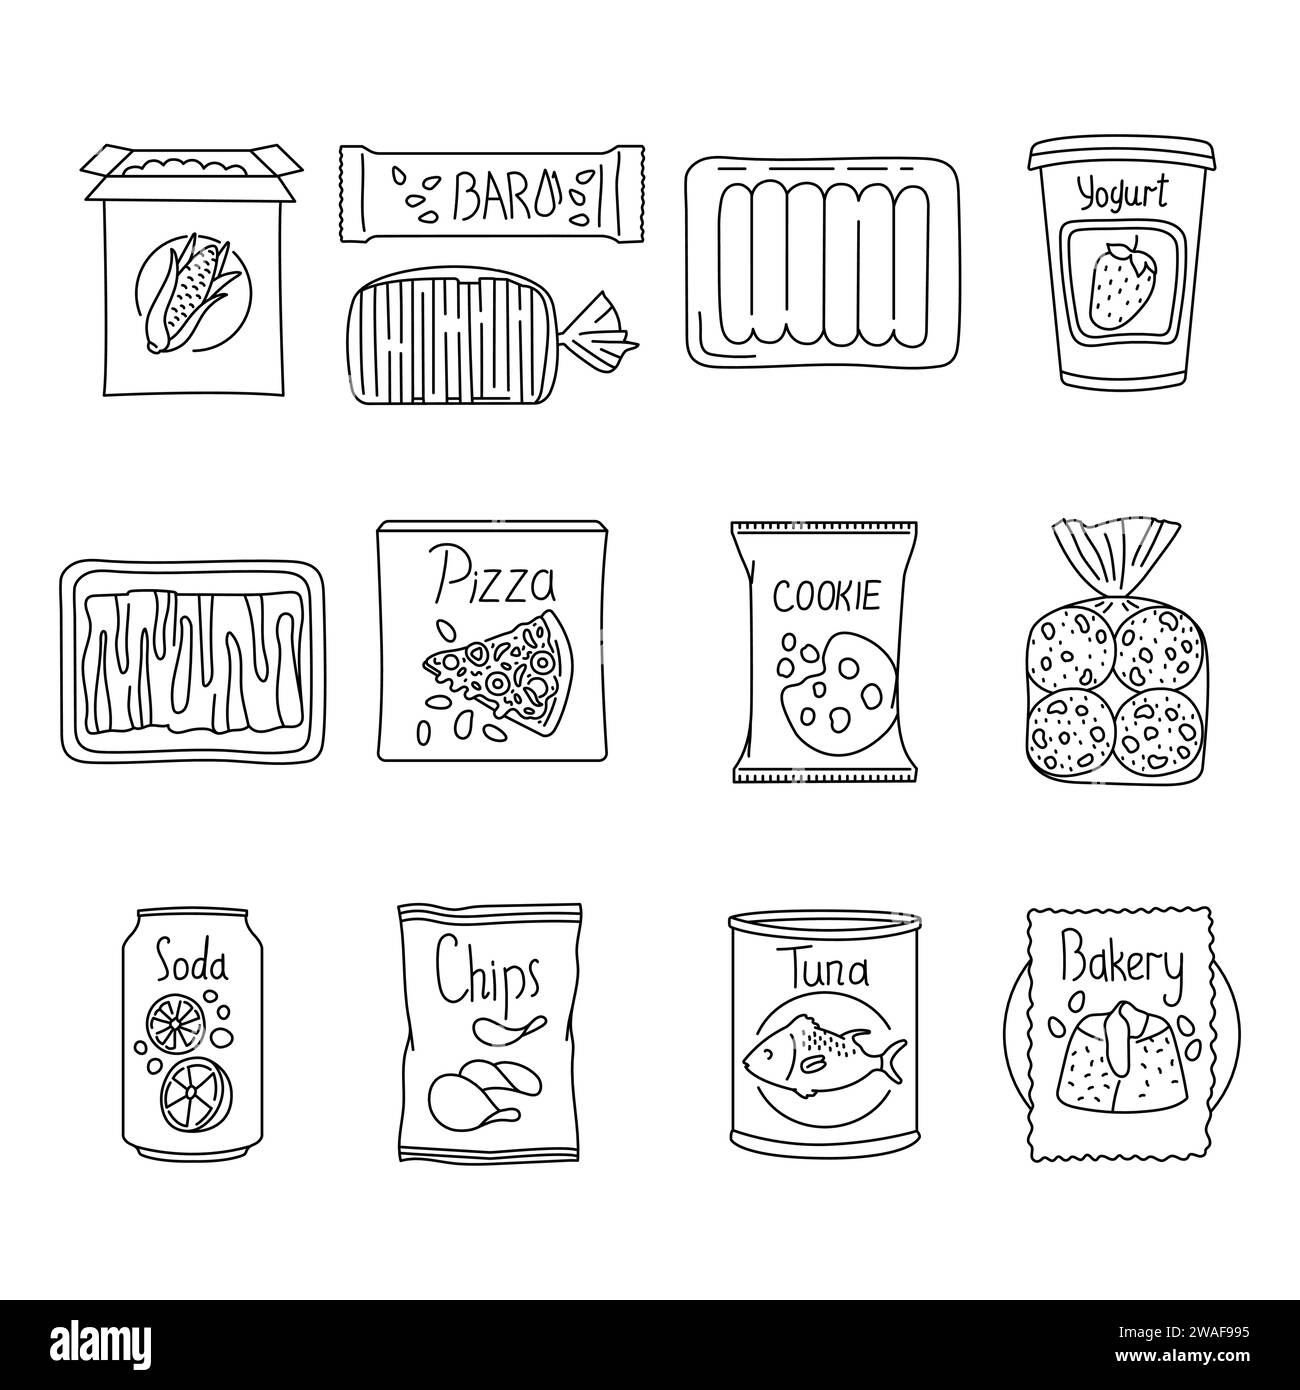 Cartoon hand drawn unprocessed food color elements. Isolated vector illustration. Stock Vector